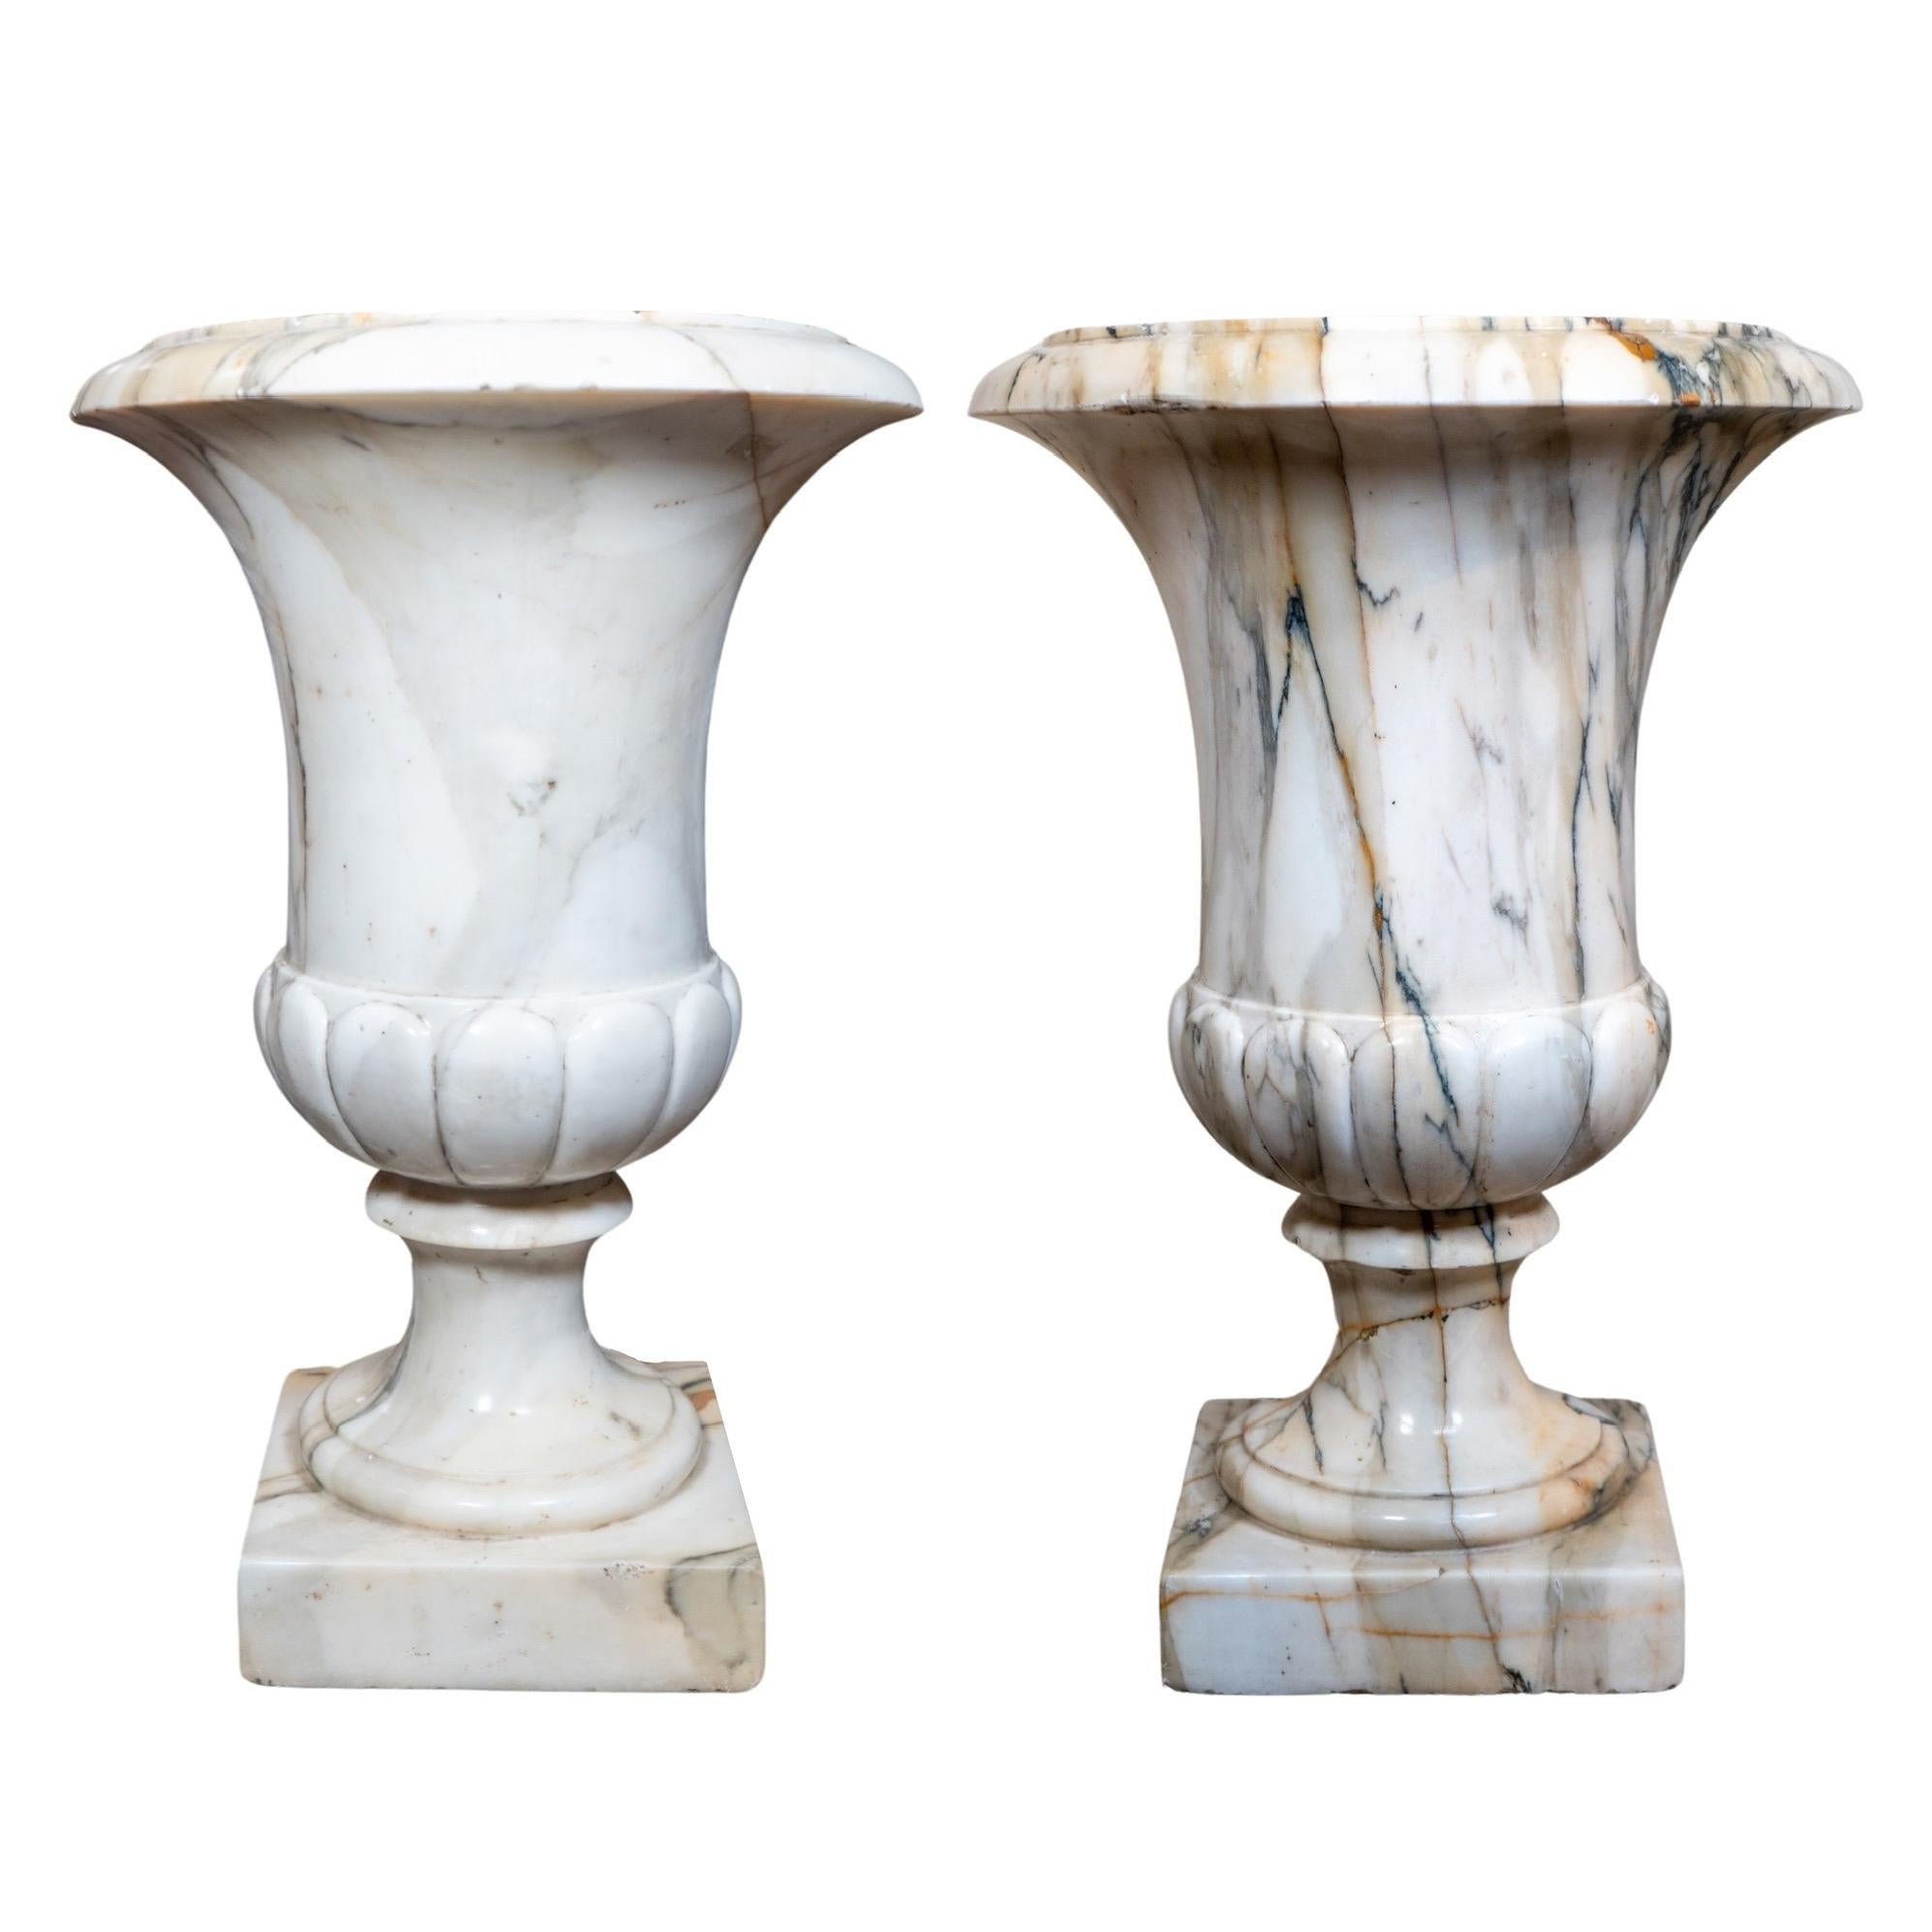 Enhance your indoor or outdoor space with this pair of Italian White Breche Marble Planters. Handcrafted in the 1870s from Italy, these planters provide a touch of elegance and sophistication to any setting. Made from high-quality white Breche